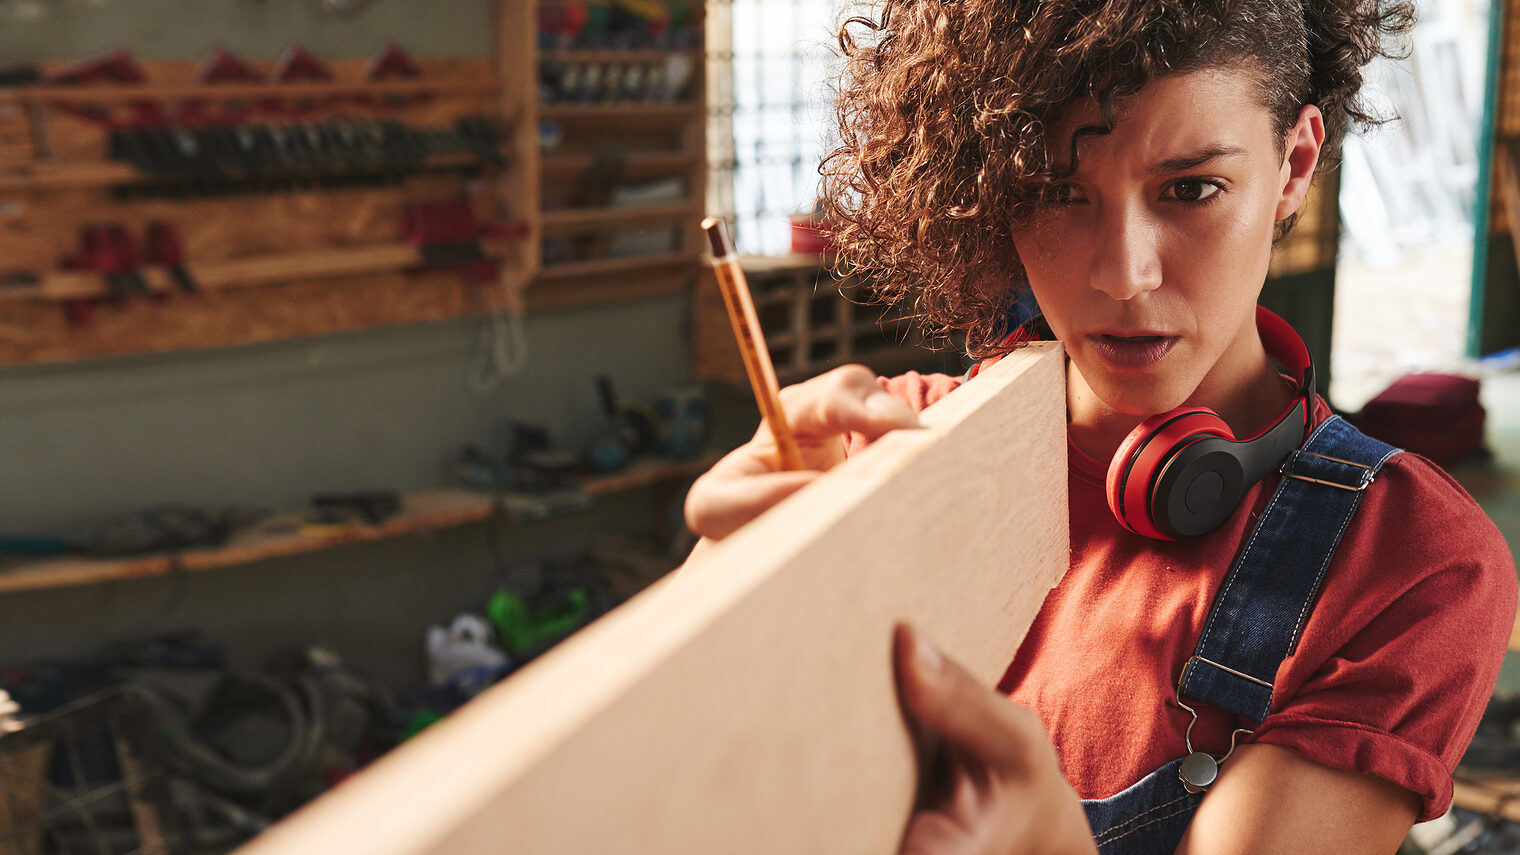 Young concentrated female carpenter with curly hair holding wooden plank and estimating its length before sawing Schlagwort(e): woman, female, young, pretty, curly, denim, overall, concentrated, focused, carpenter, carpentry, joinery, timber, wood, wooden, plank, measuring, measurement, length, eye, sight, tool, skill, manual, equipment, professional, craft, craftsman, handyman, occupation, working, woodworking, workshop, lumber, woman, female, young, pretty, curly, denim, overall, concentrated, focused, carpenter, carpentry, joinery, timber, wood, wooden, plank, measuring, measurement, length, eye, sight, tool, skill, manual, equipment, professional, craft, craftsman, handyman, occupation, working, woodworking, workshop, lumber